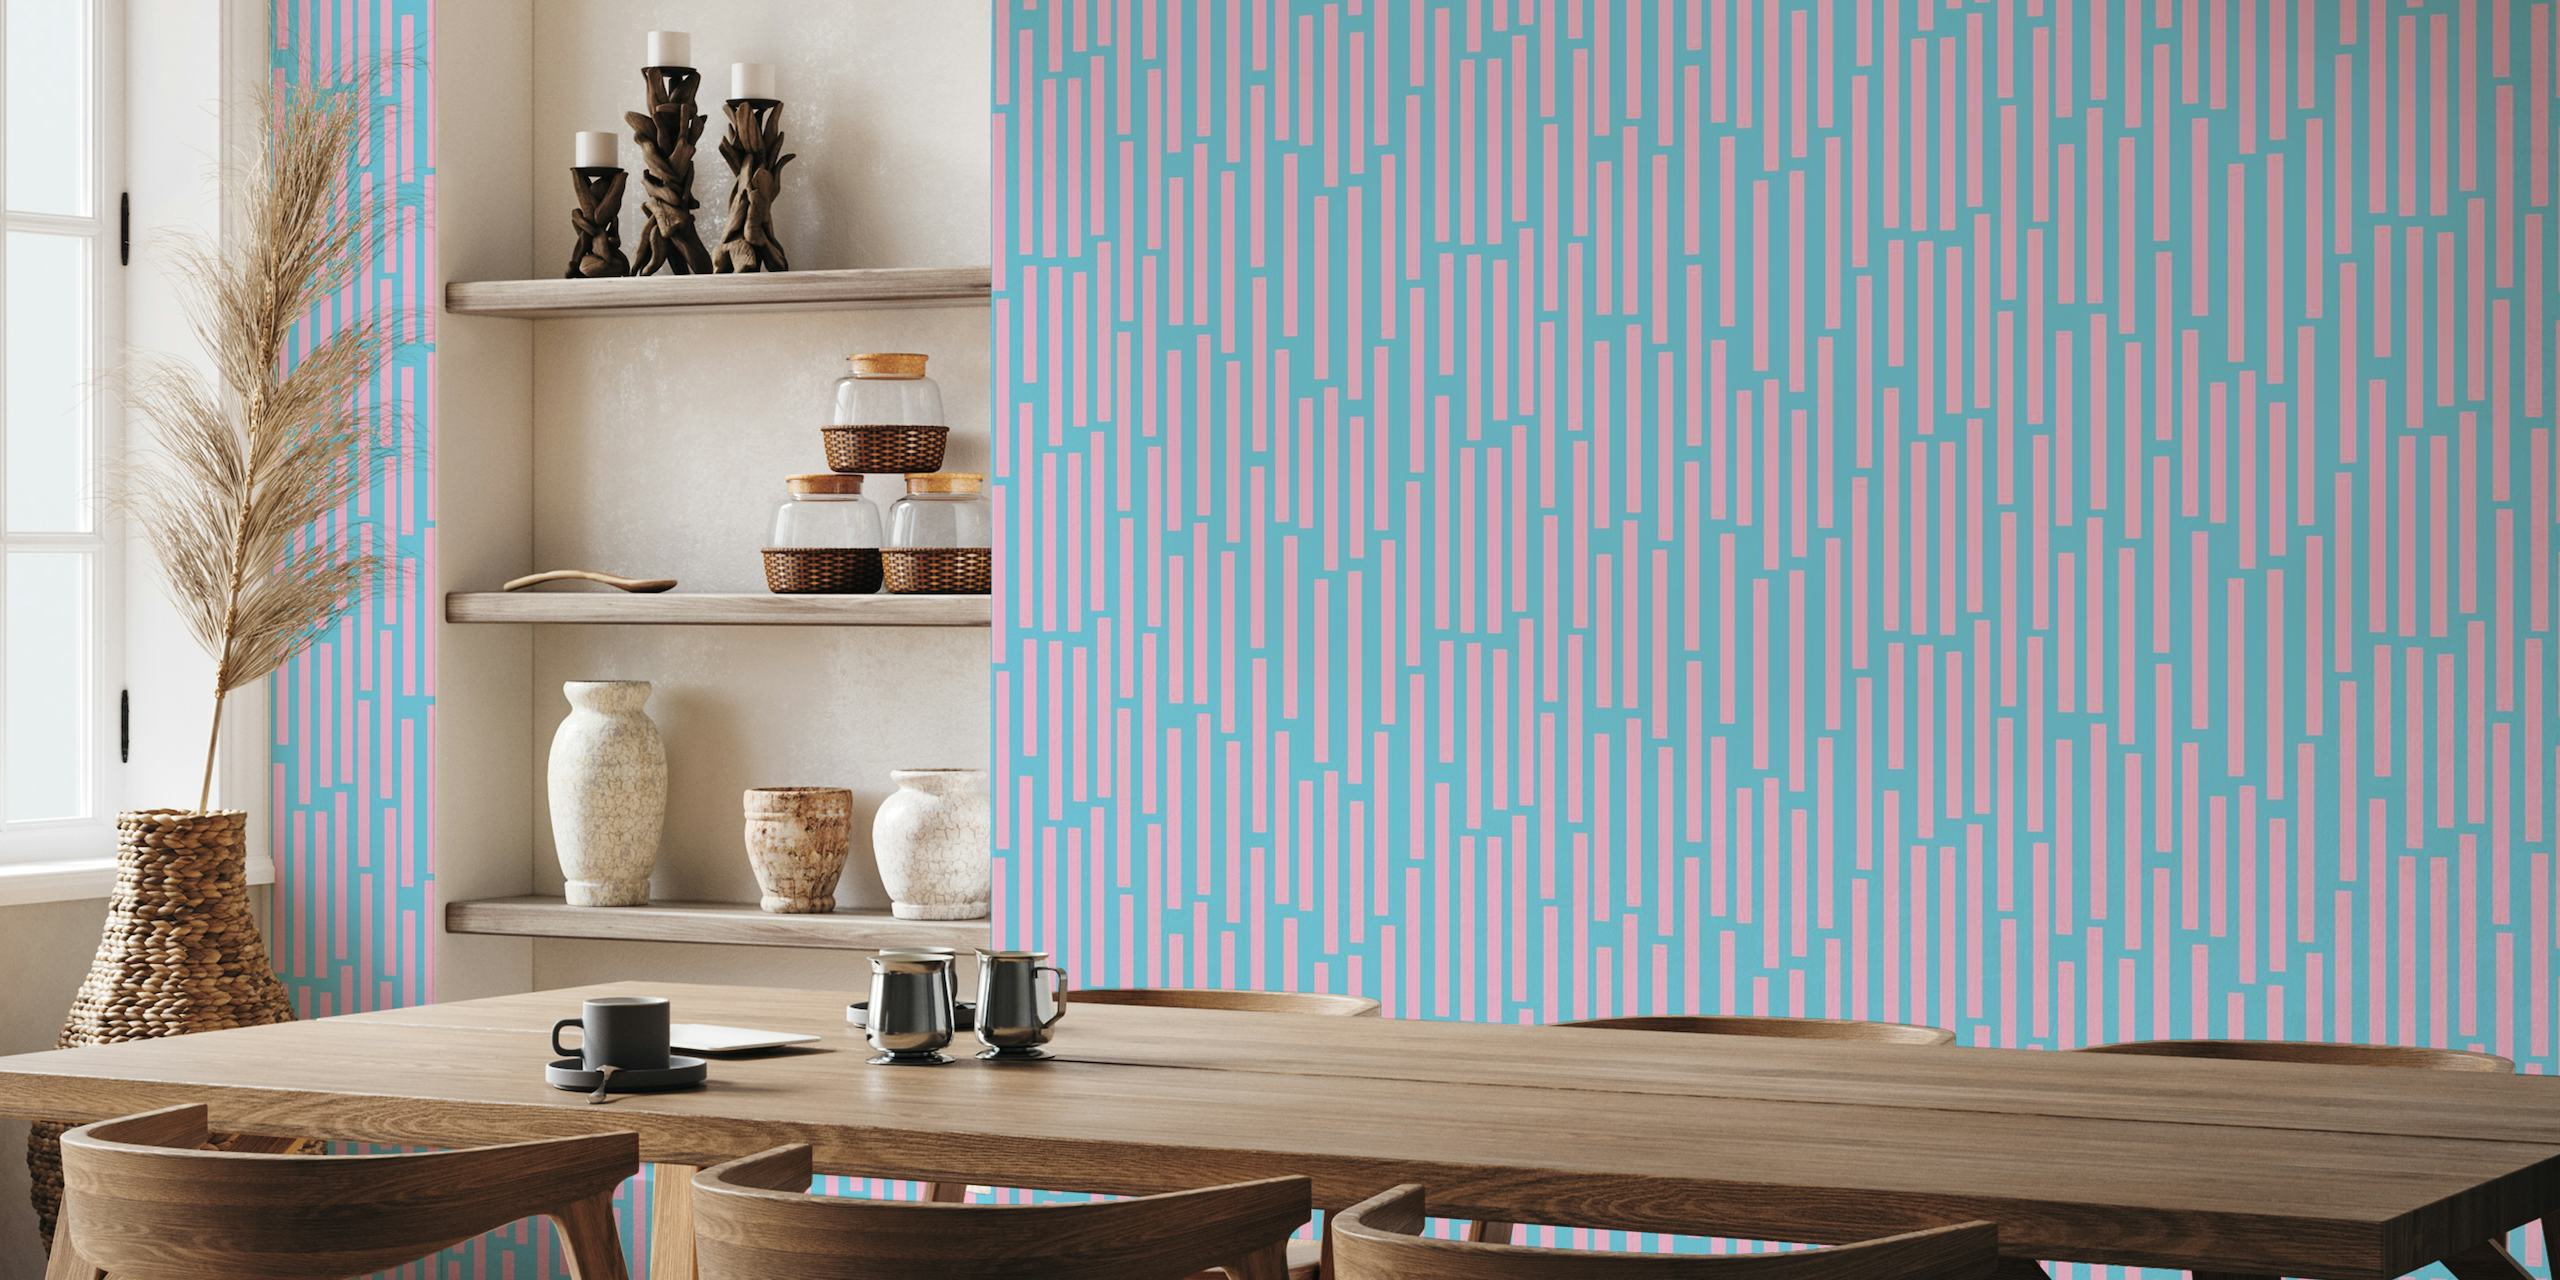 SHOWERS Vertical Geo Stripes - Pink on Blue tapete